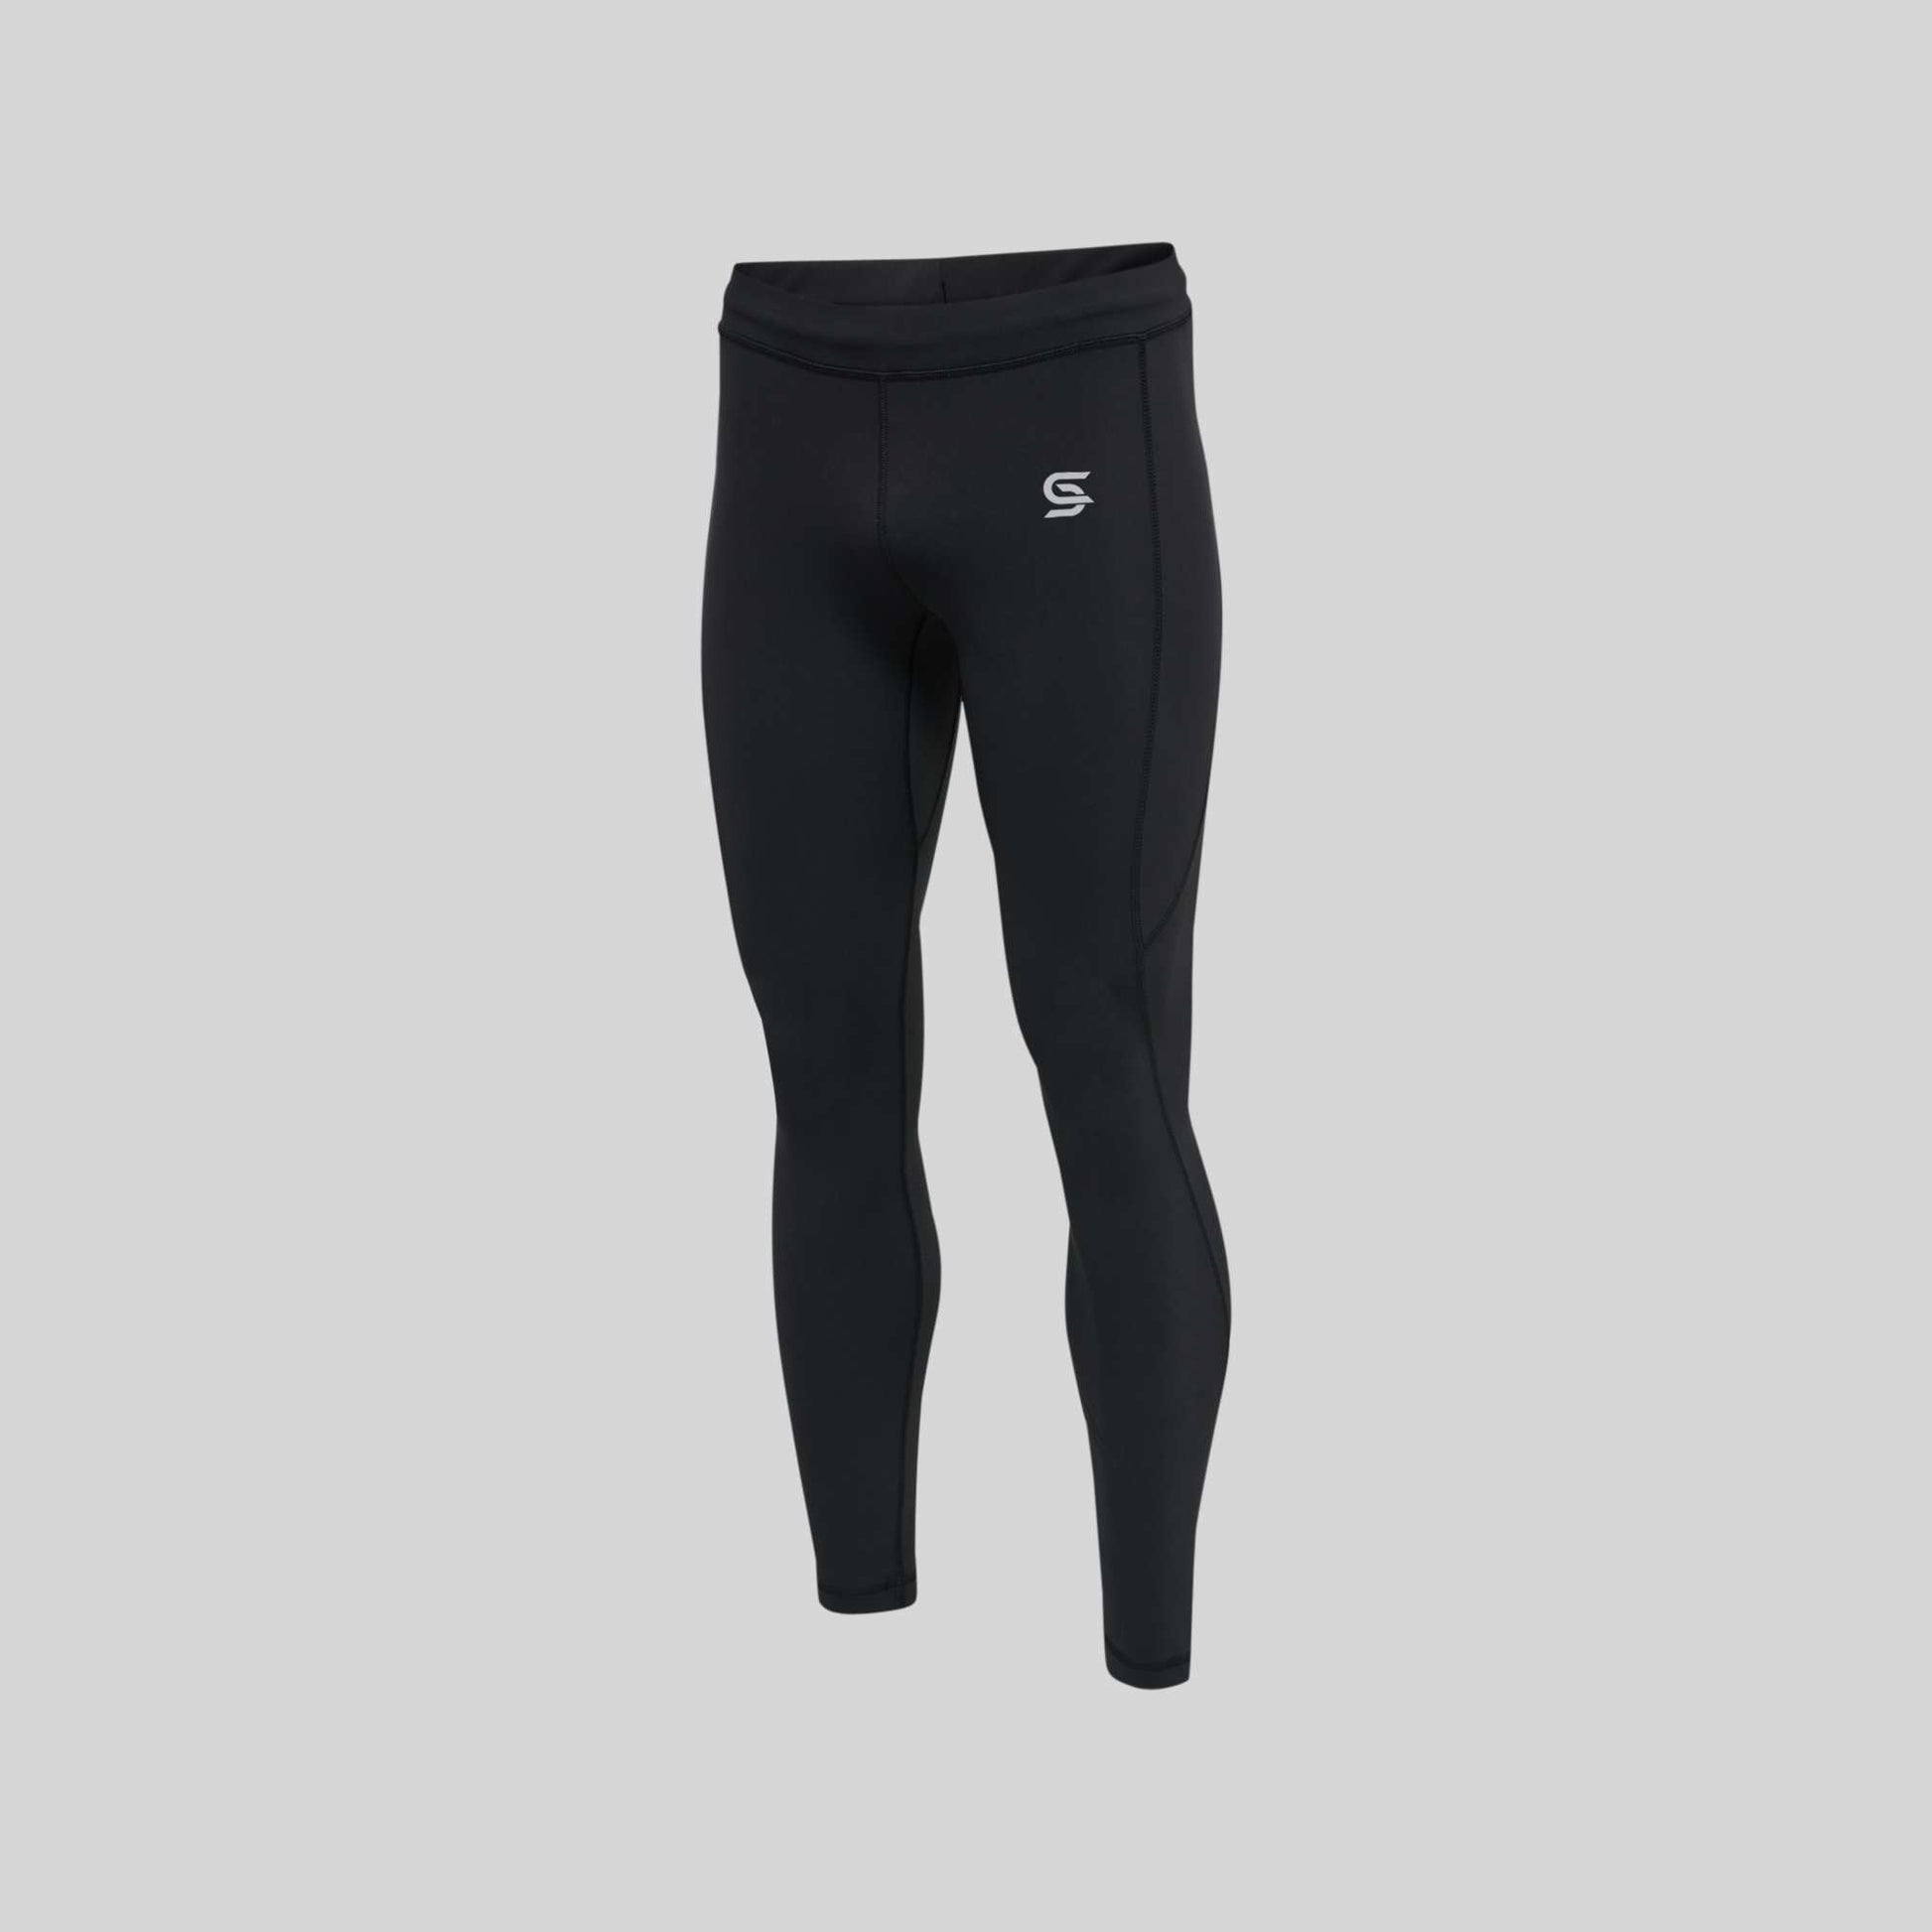 Buy Men's Compression Tights For Gym Online Shopping in Pakistan